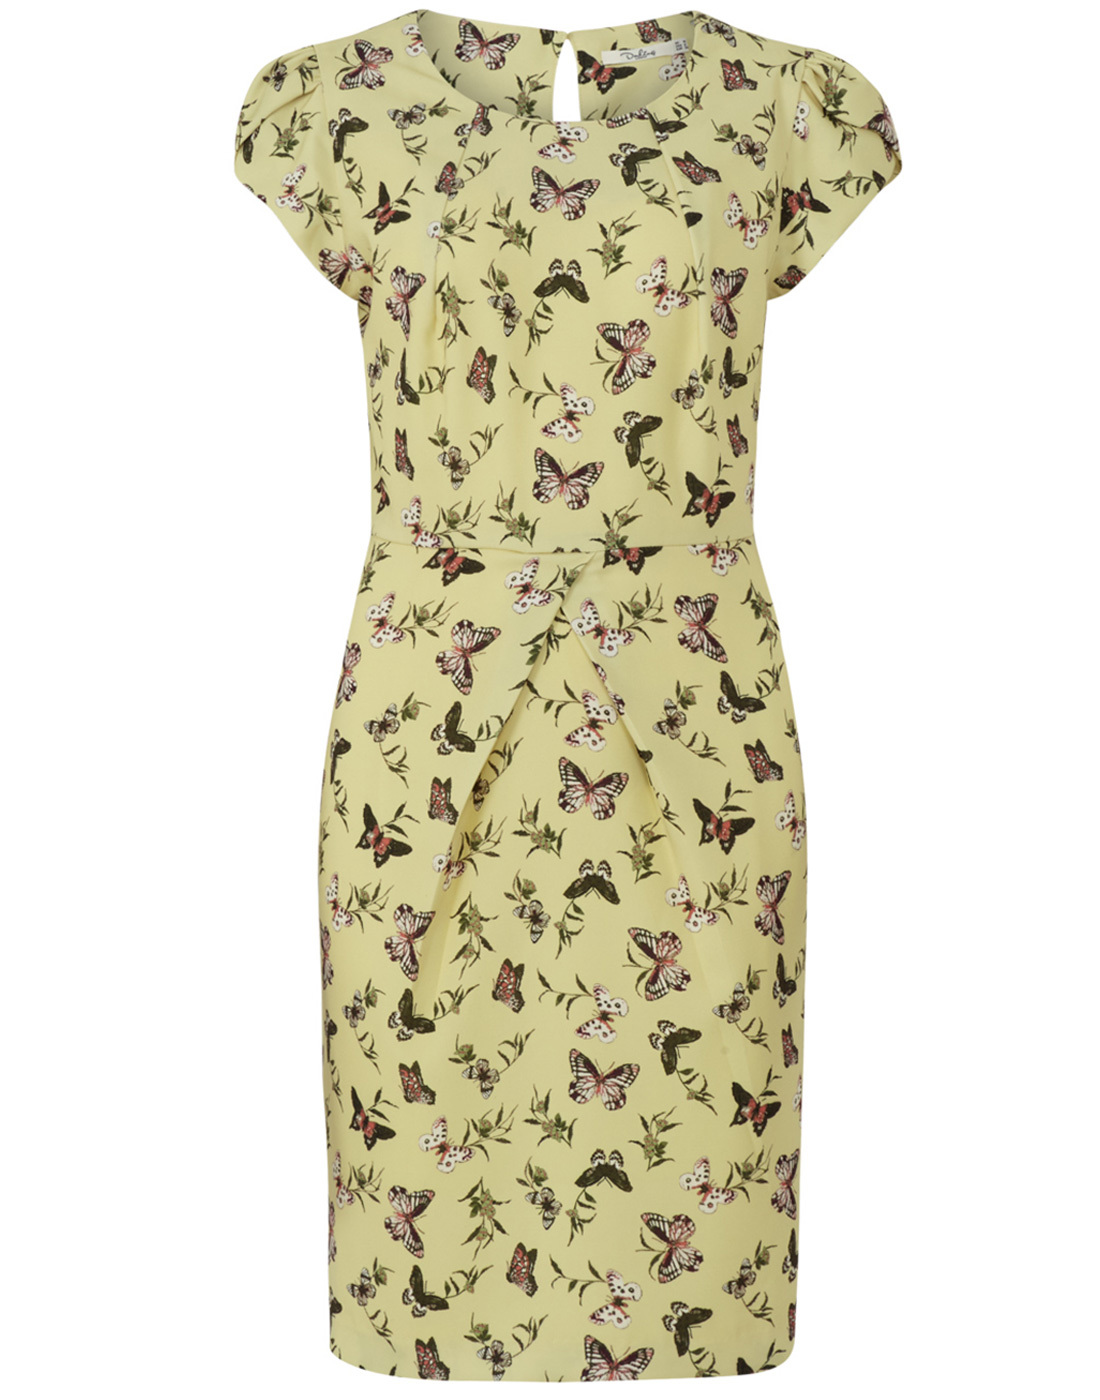 DARLING Bluebell Retro Vintage 50s Butterfly Dress in Green